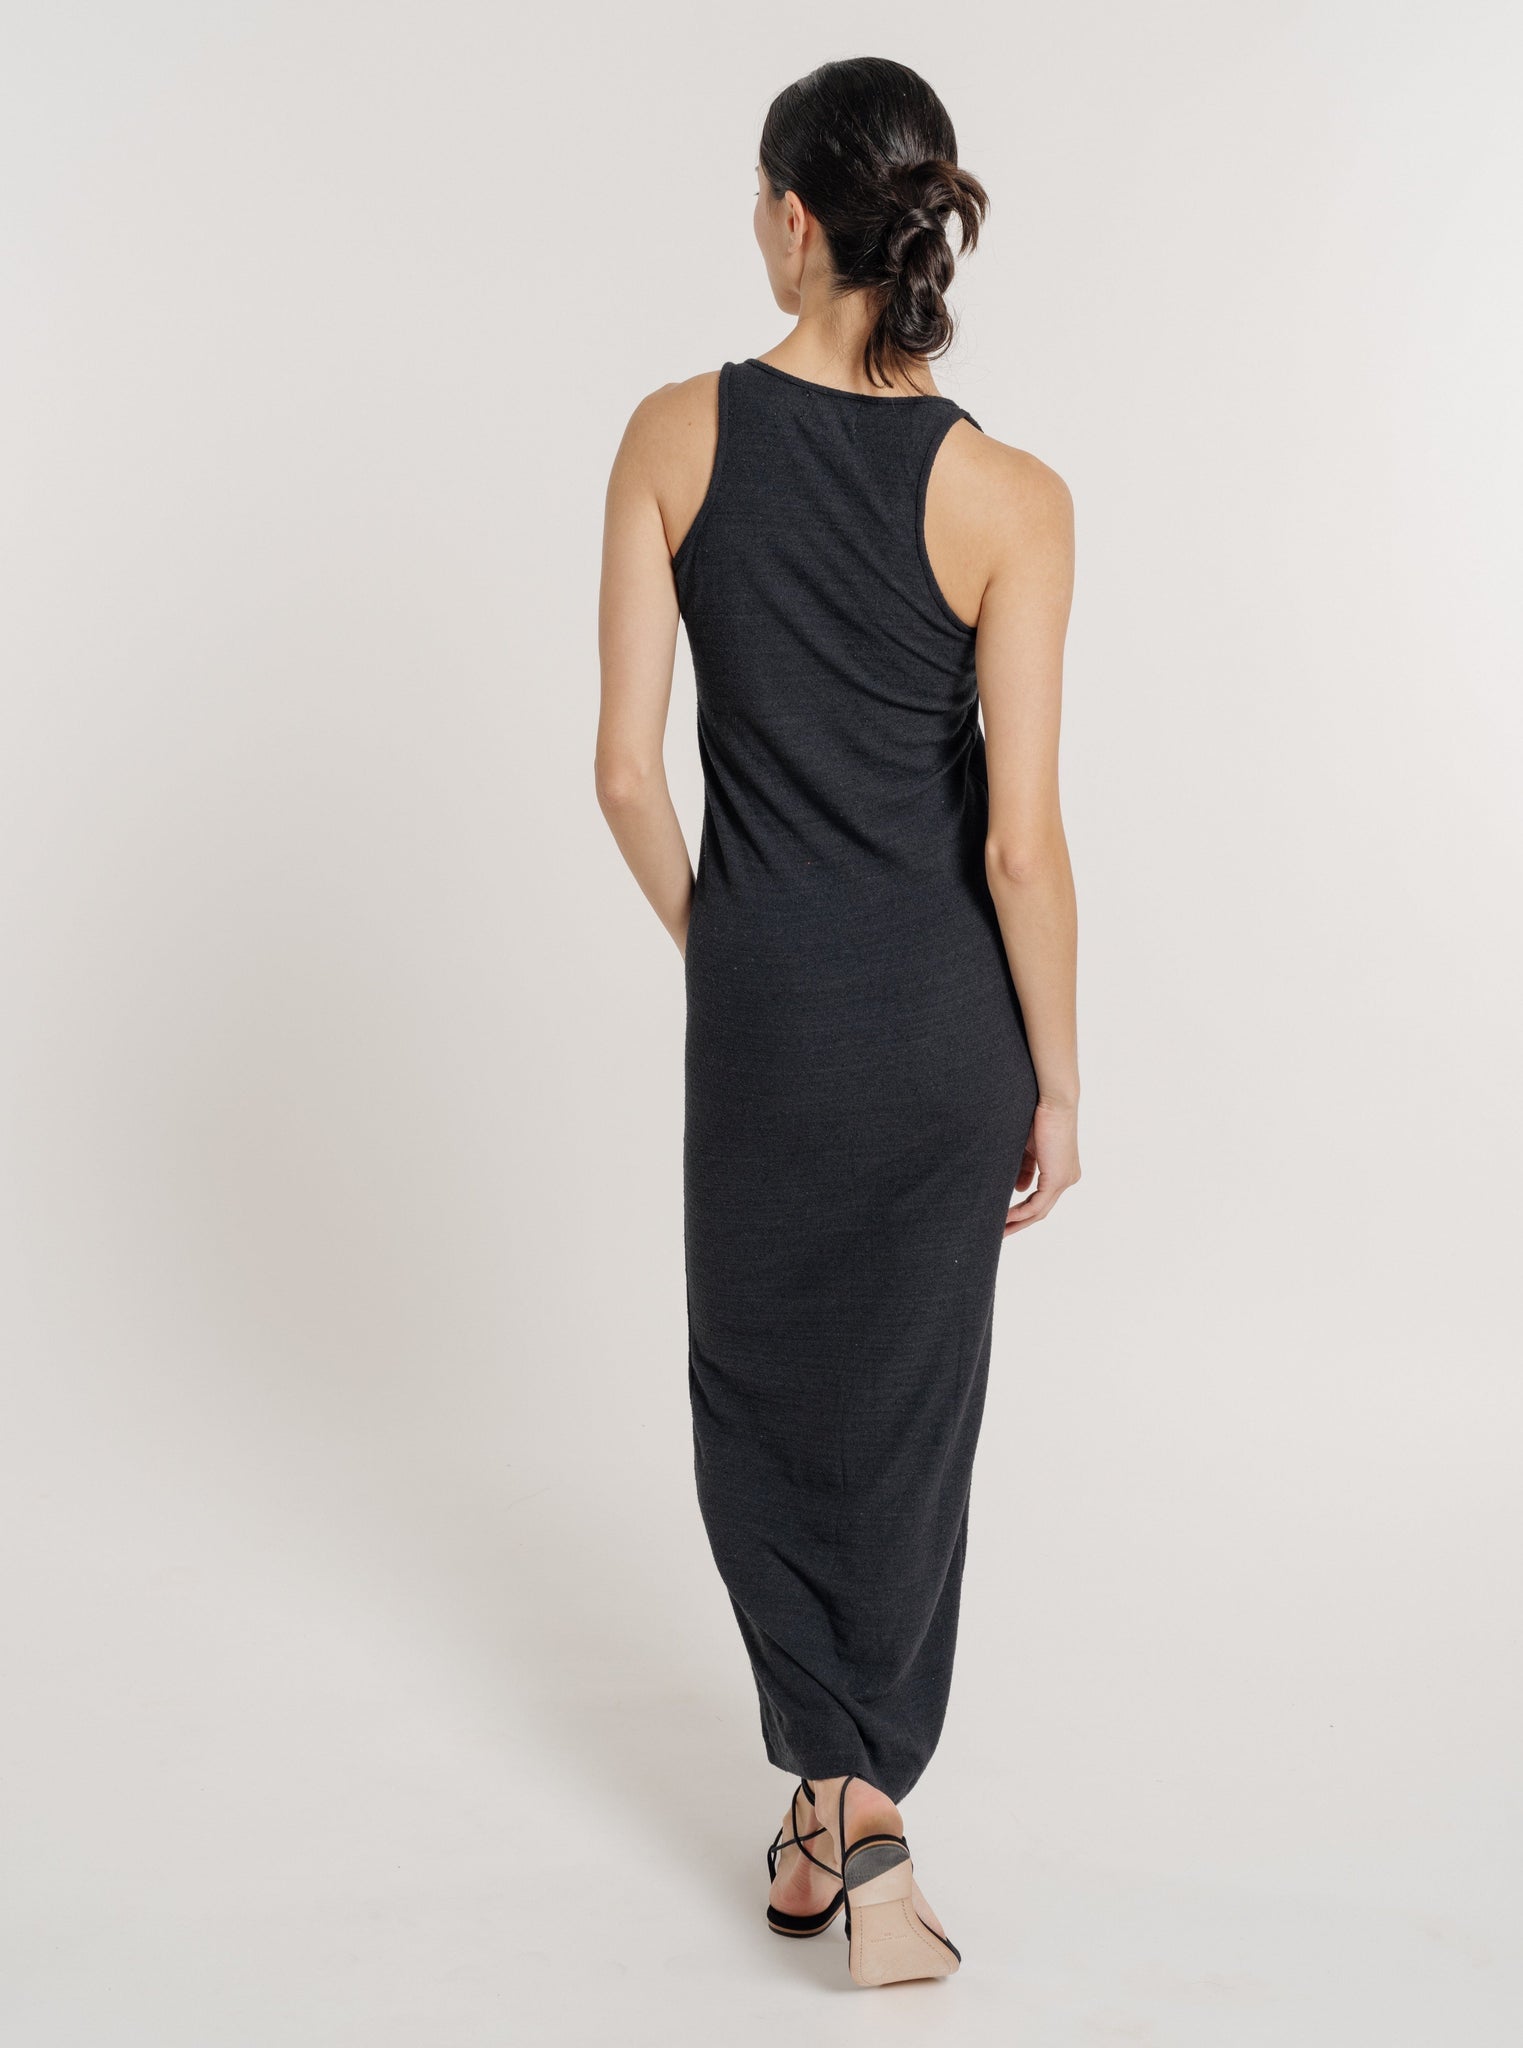 The back view of a woman wearing a Jersey Knit Tank Dress - Black Silk Noil - Pre-order made of textured fabric.